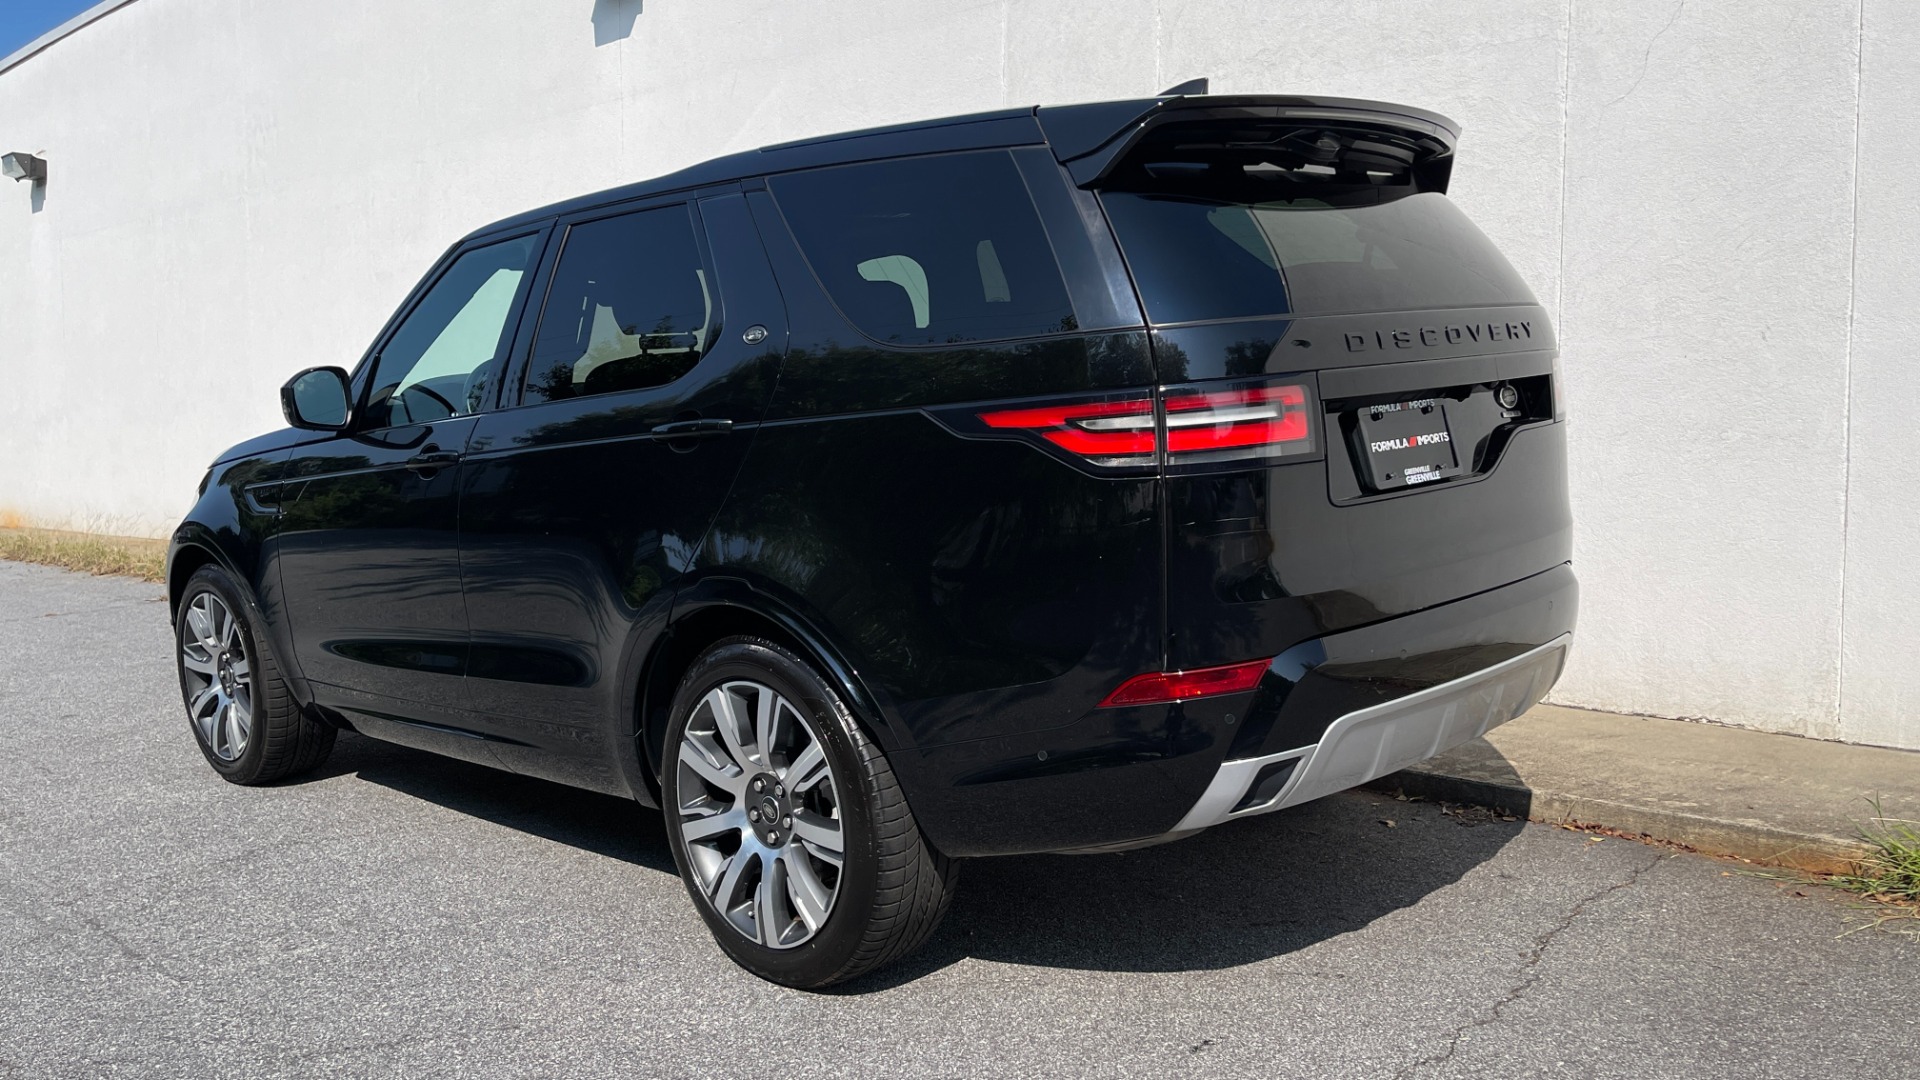 Used 2019 Land Rover Discovery HSE / SEVEN SEAT / DYNAMIC PACKAGE / 21IN WHEELS / REMOTE SEAT PACKAGE for sale $46,495 at Formula Imports in Charlotte NC 28227 8